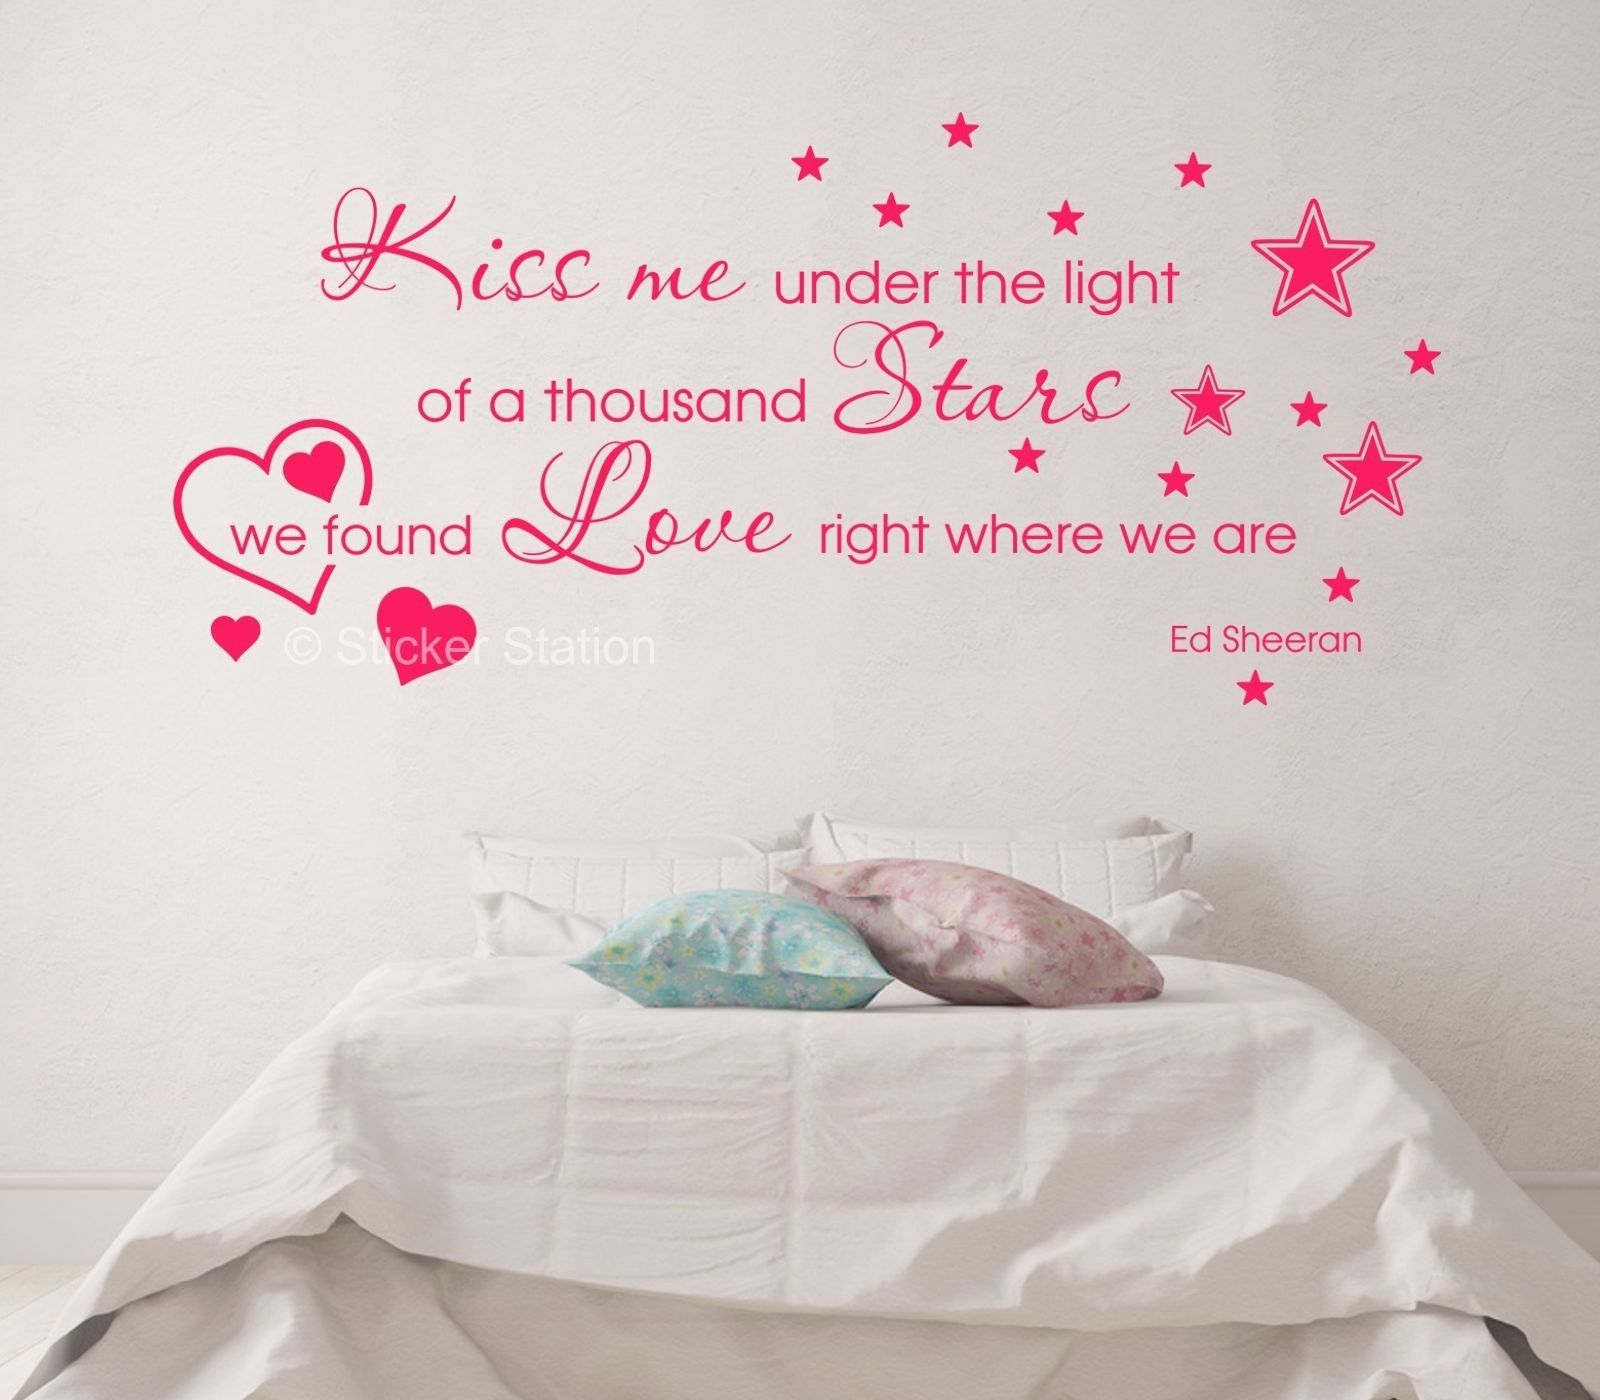 Ed Sheeran Thinking Out Loud – Kiss Me Song Lyrics Wall Art Sticker Throughout Most Up To Date Song Lyric Wall Art (Gallery 1 of 20)